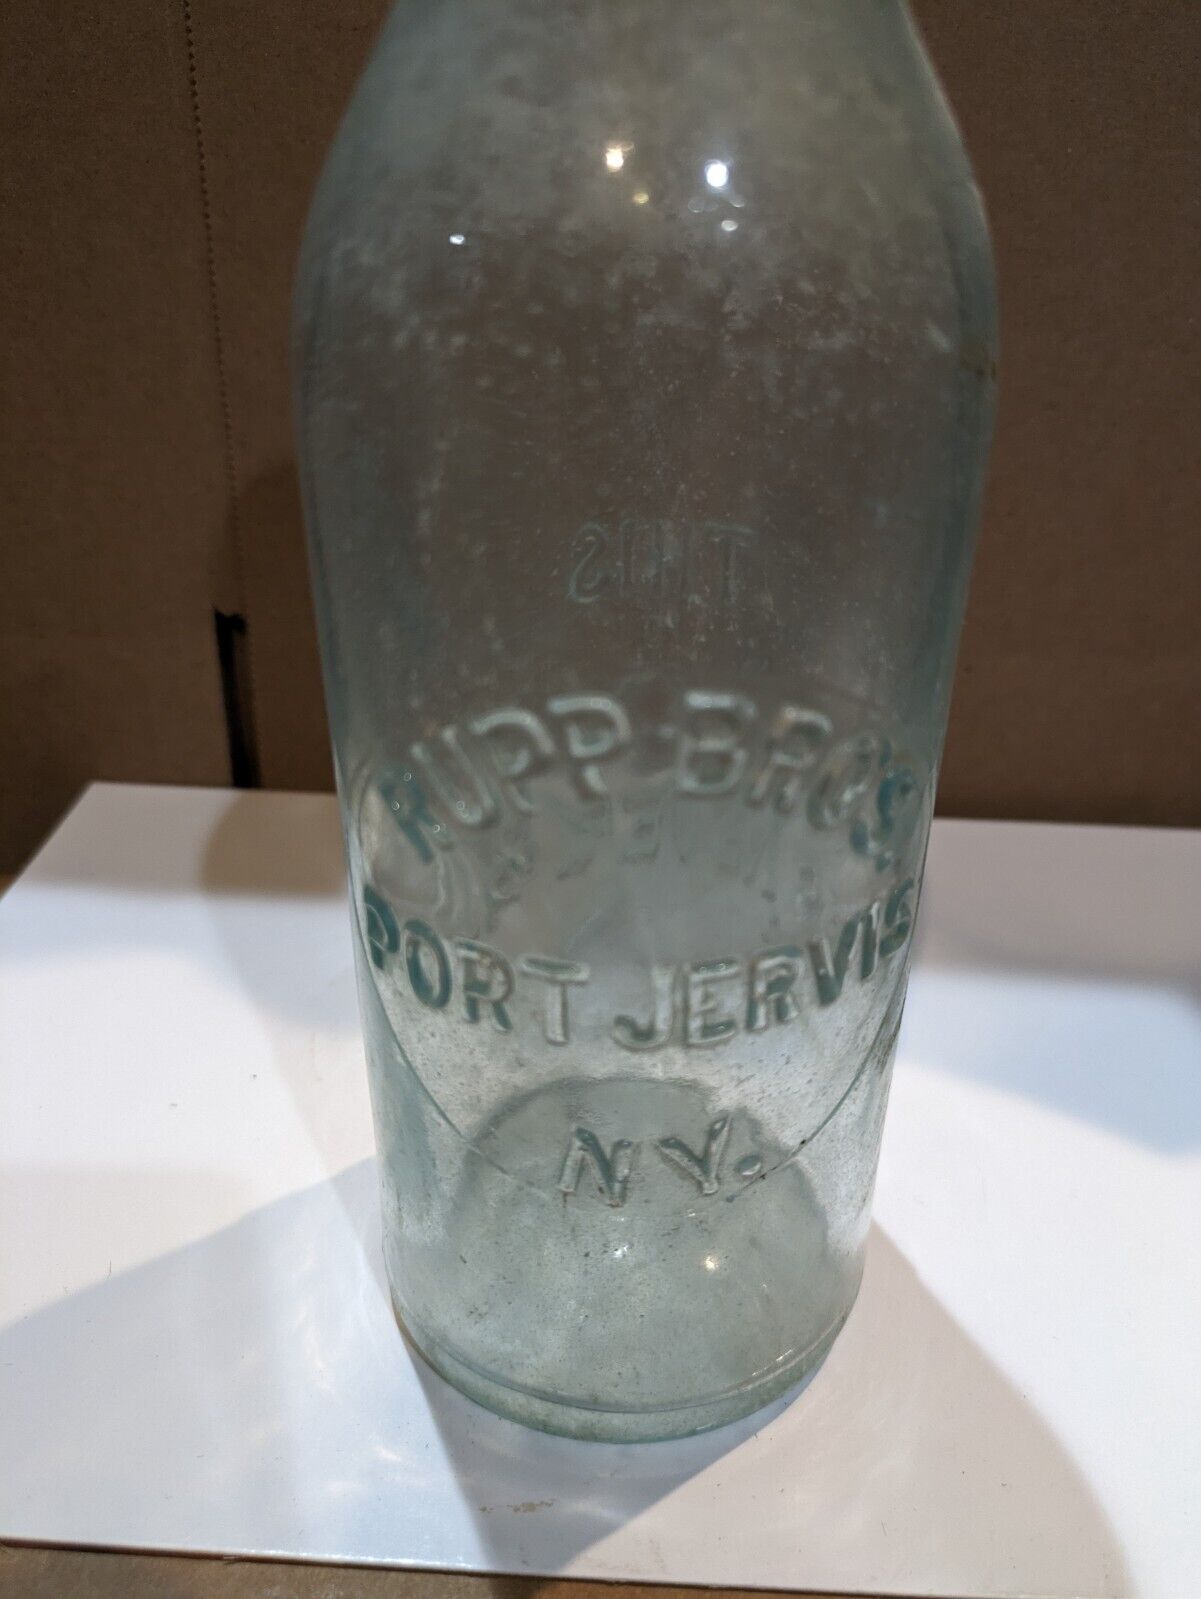 Rupp Brothers Blob Top Beer Bottle,  Port Jervis NY